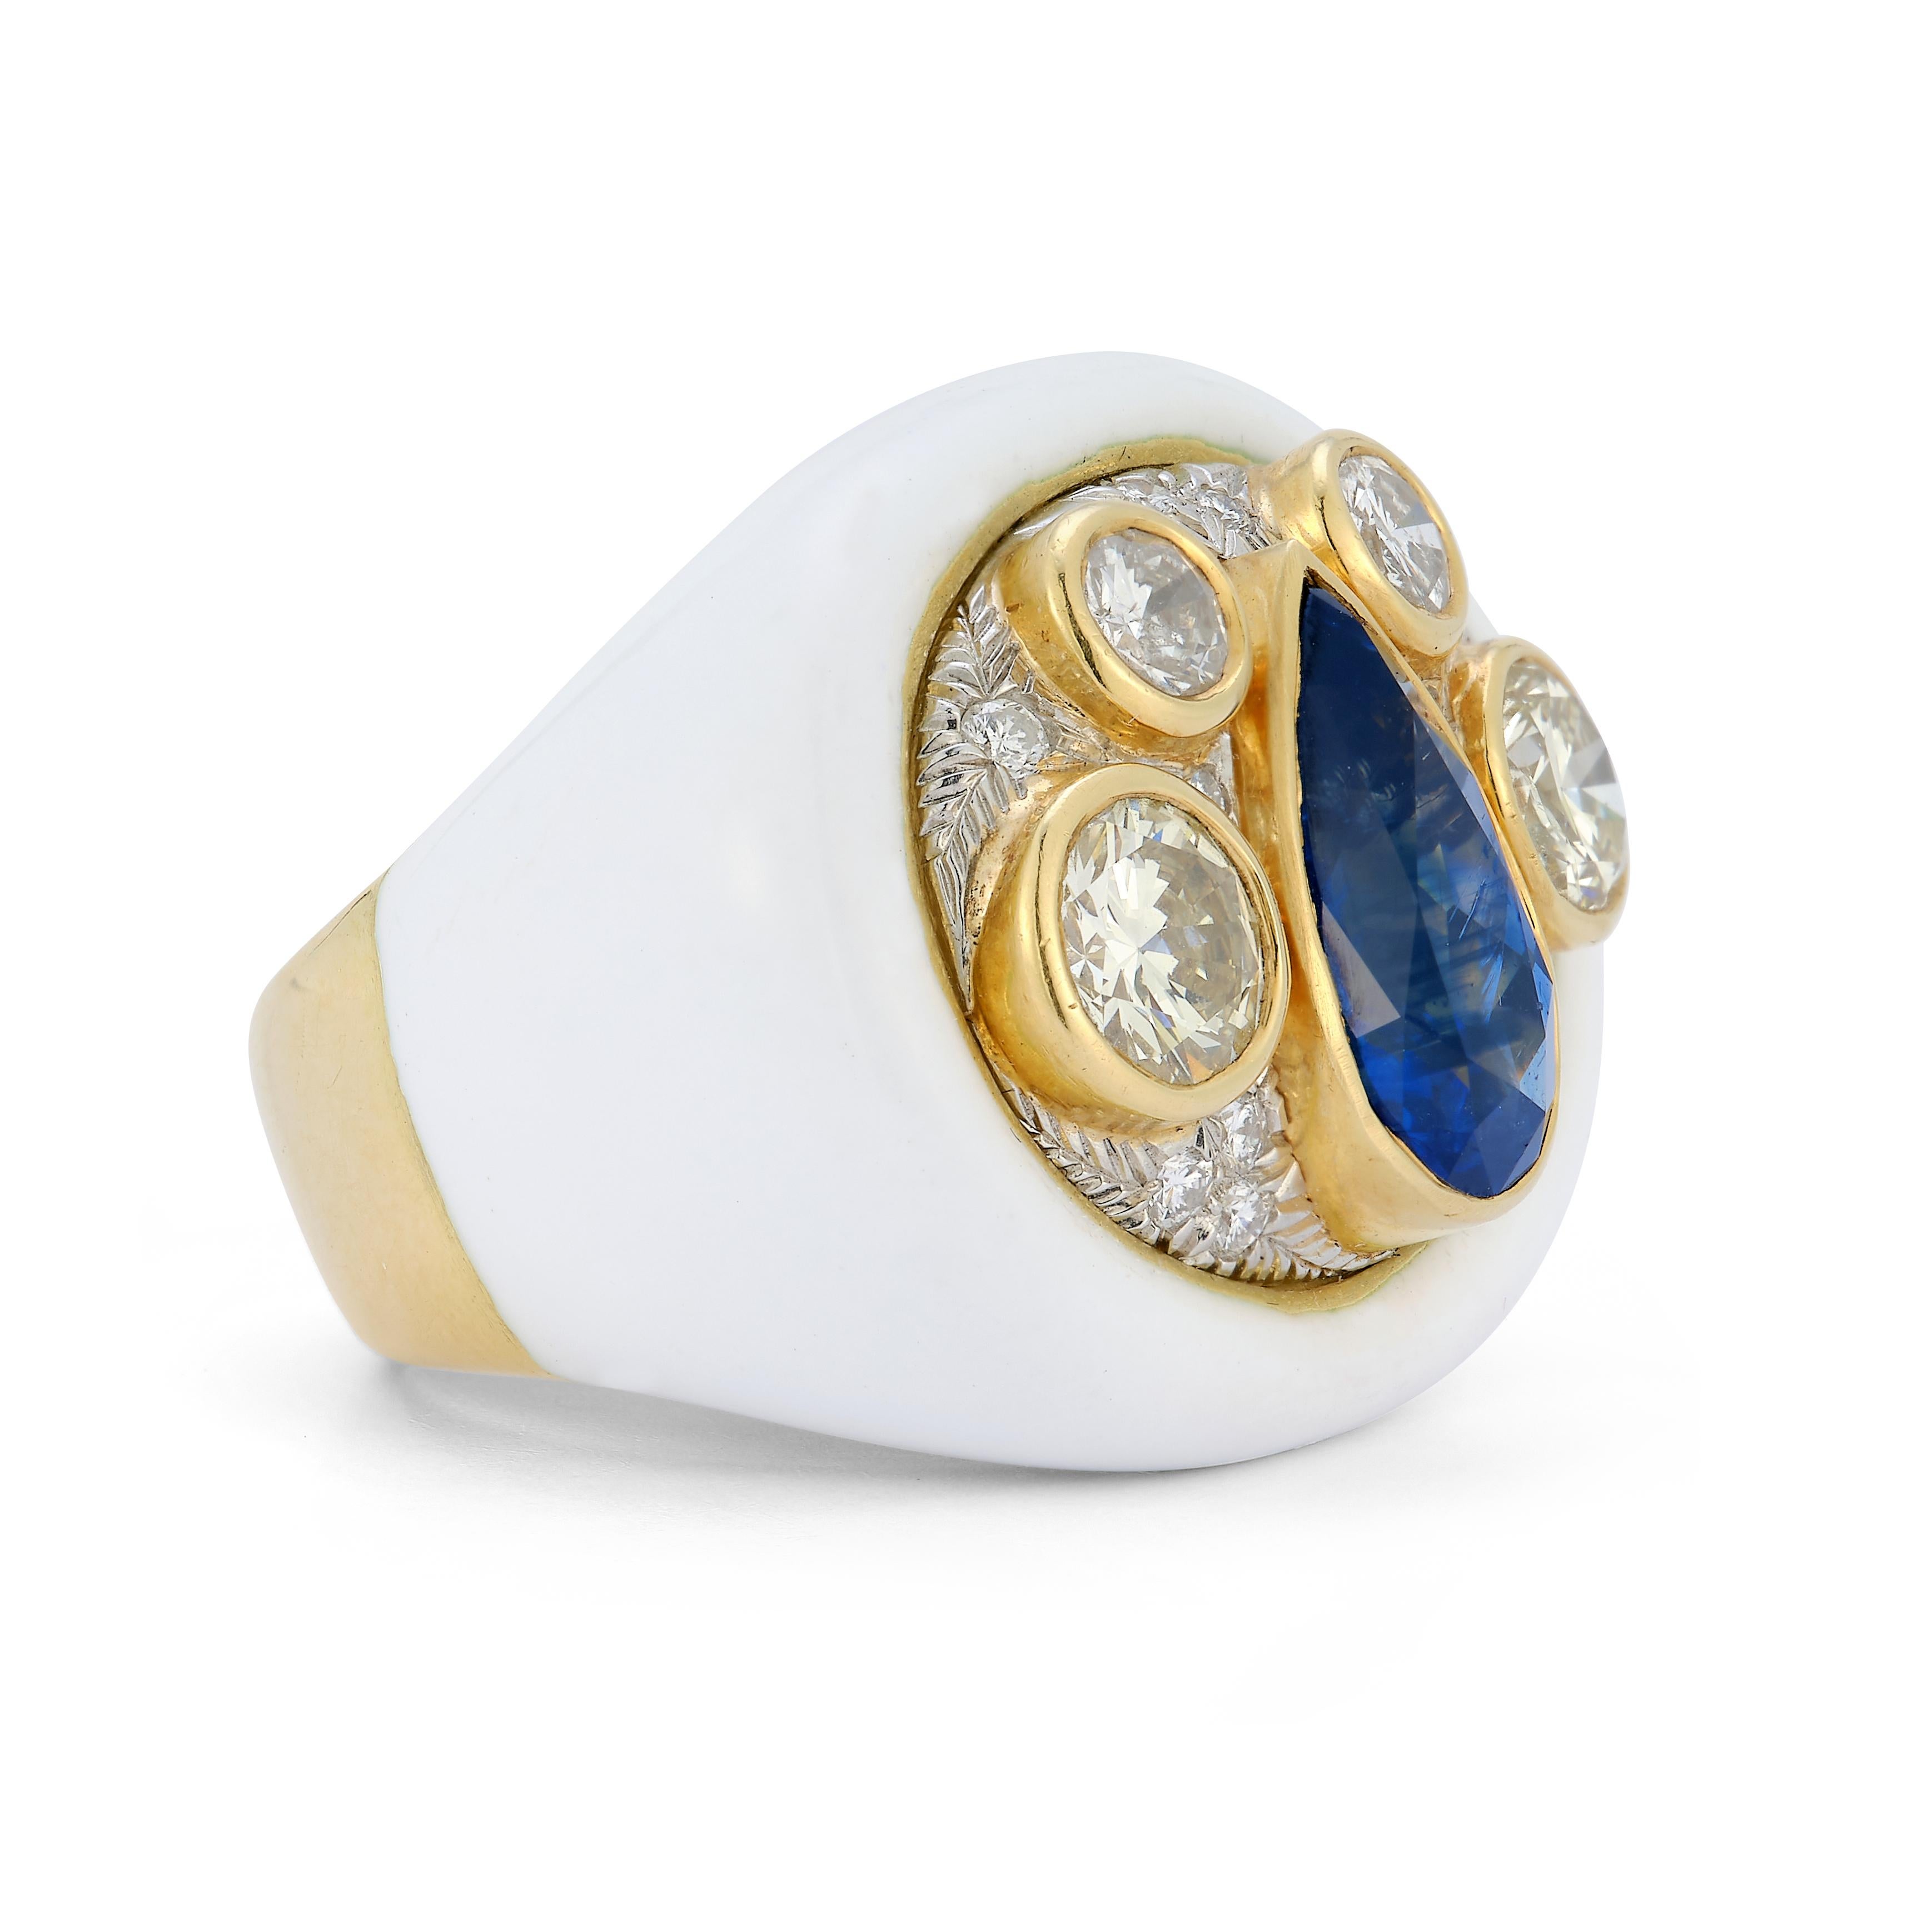 Pear Cut Sapphire Diamond and White Enamel Ring by Andrew Clunn For Sale